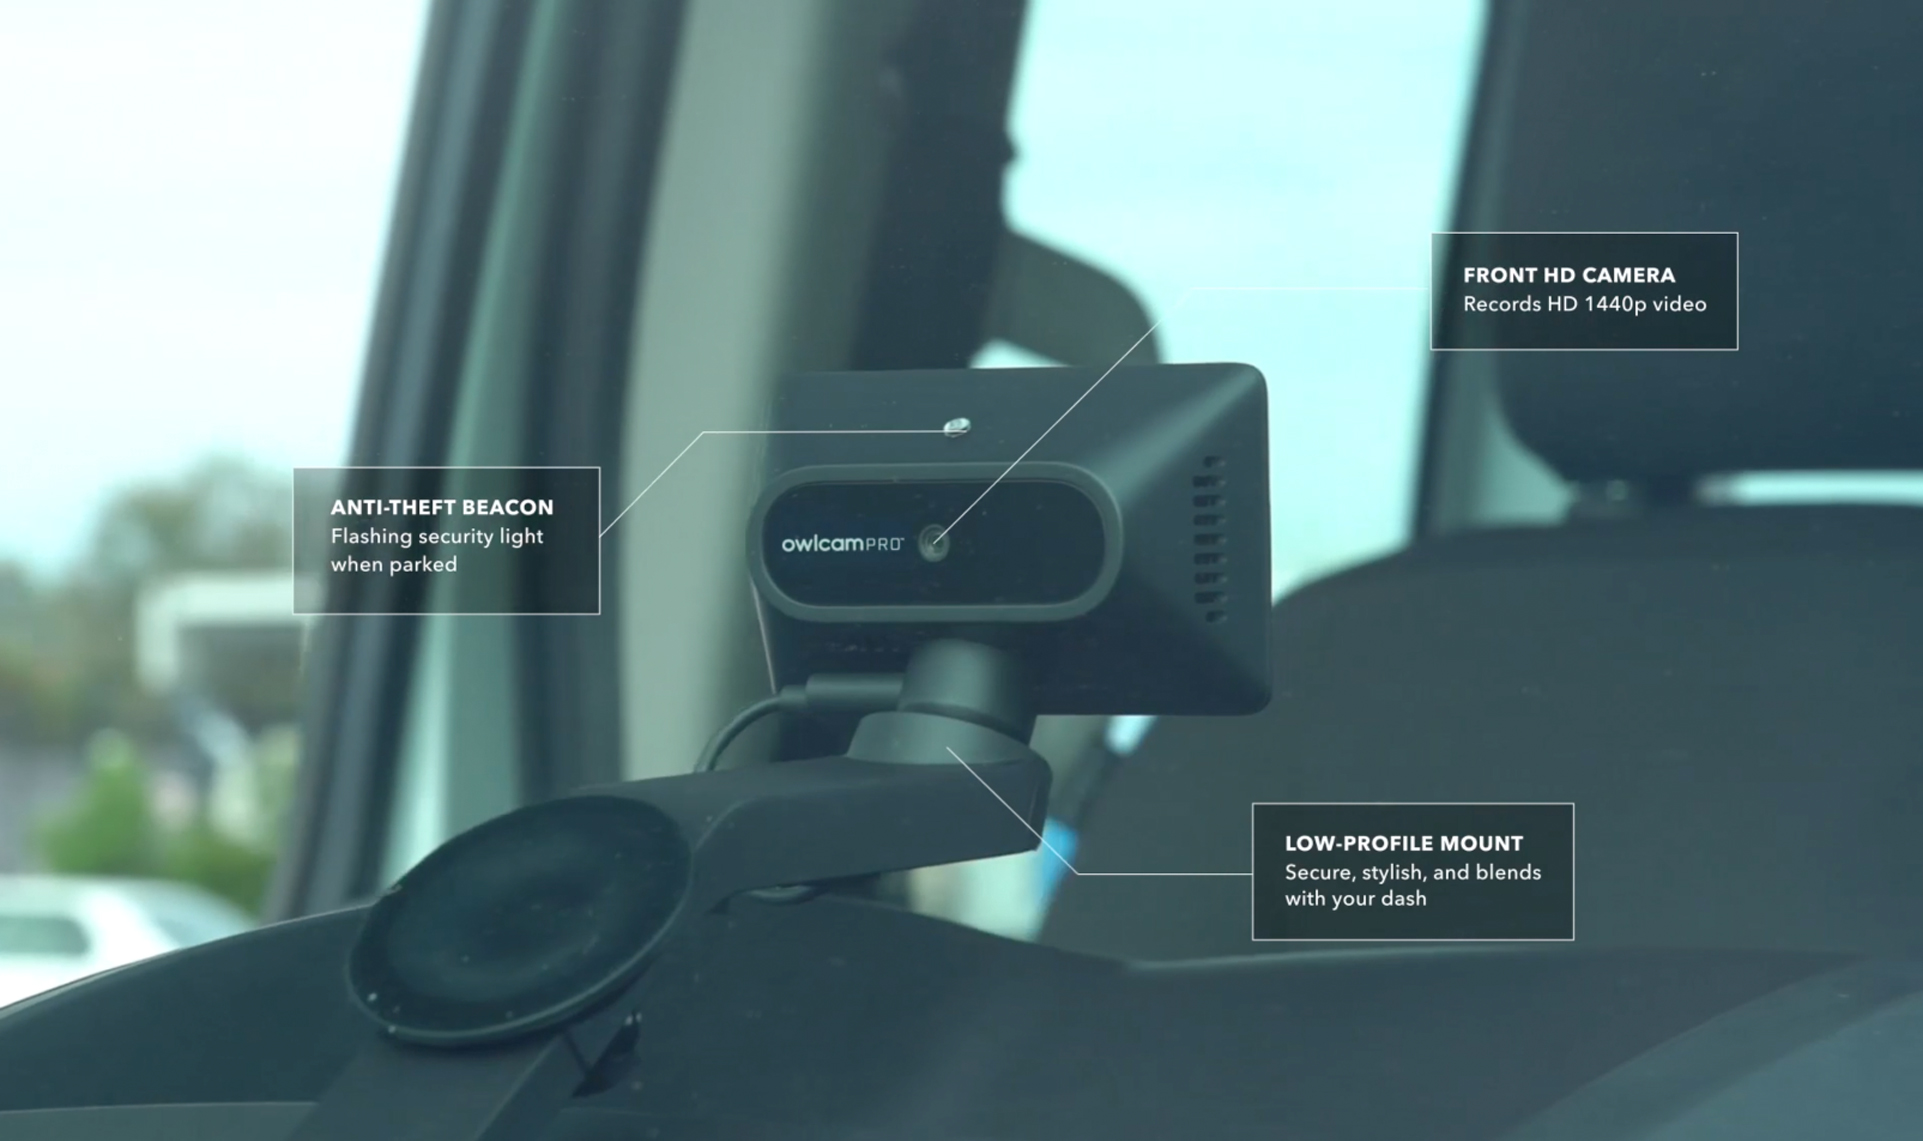 Rear view of Owlcam Pro which includes information on features. Features listed are anti-theft beacon, front HD camera, and a low-profile mount.